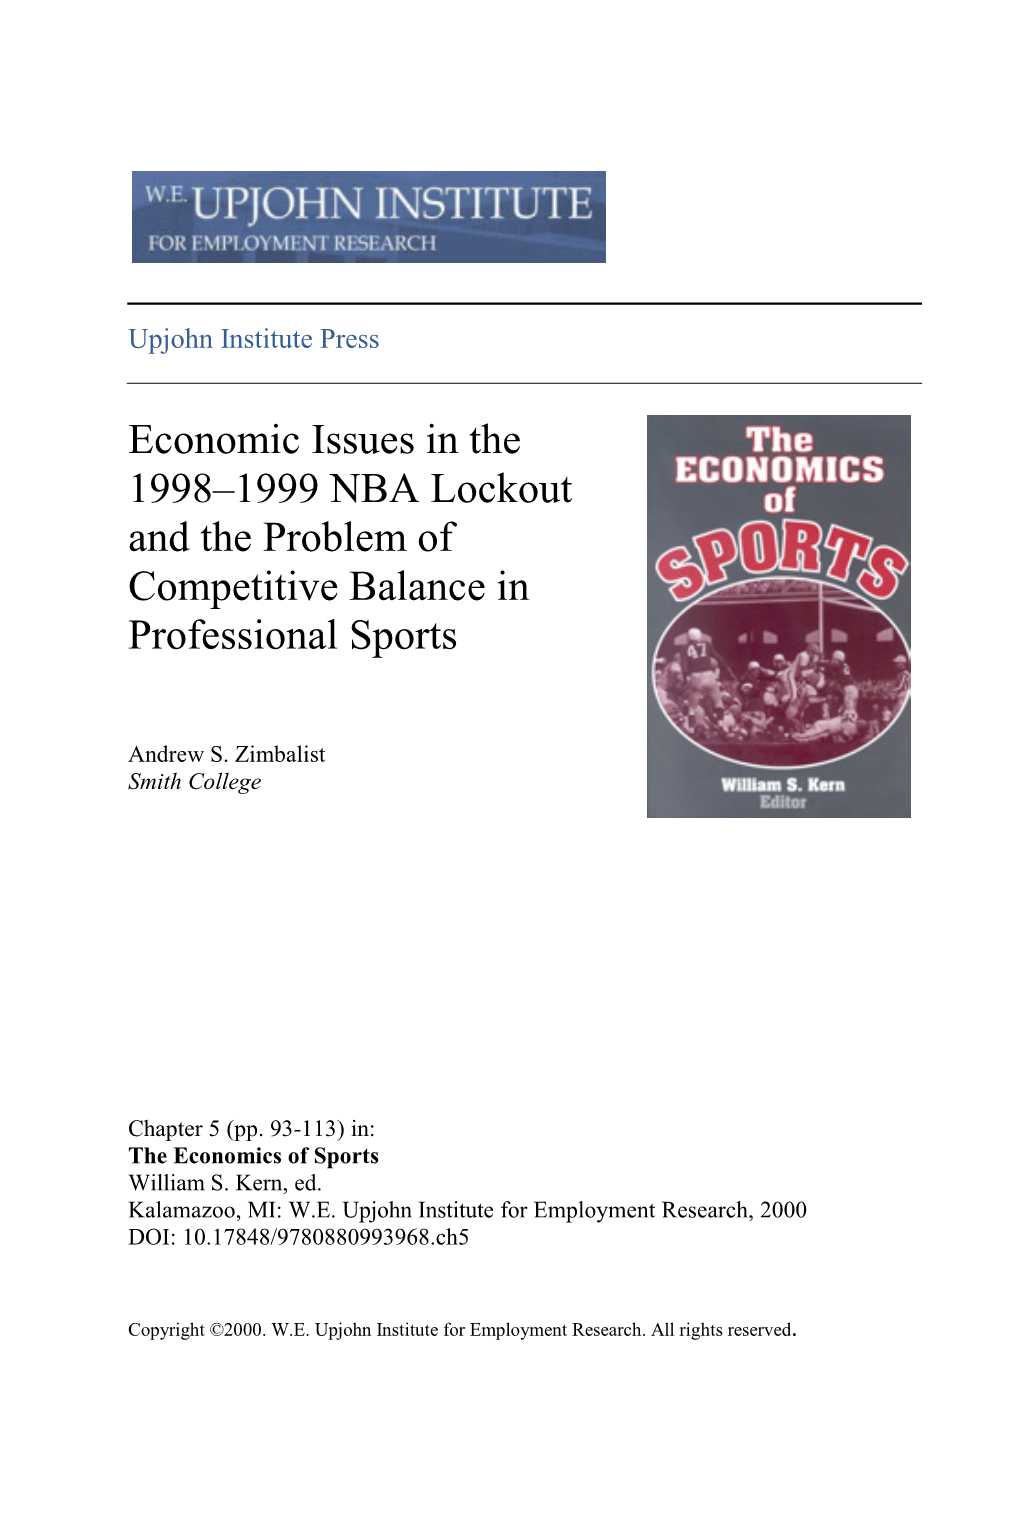 Economic Issues in the 1998-1999 NBA Lockout and the Problem Of